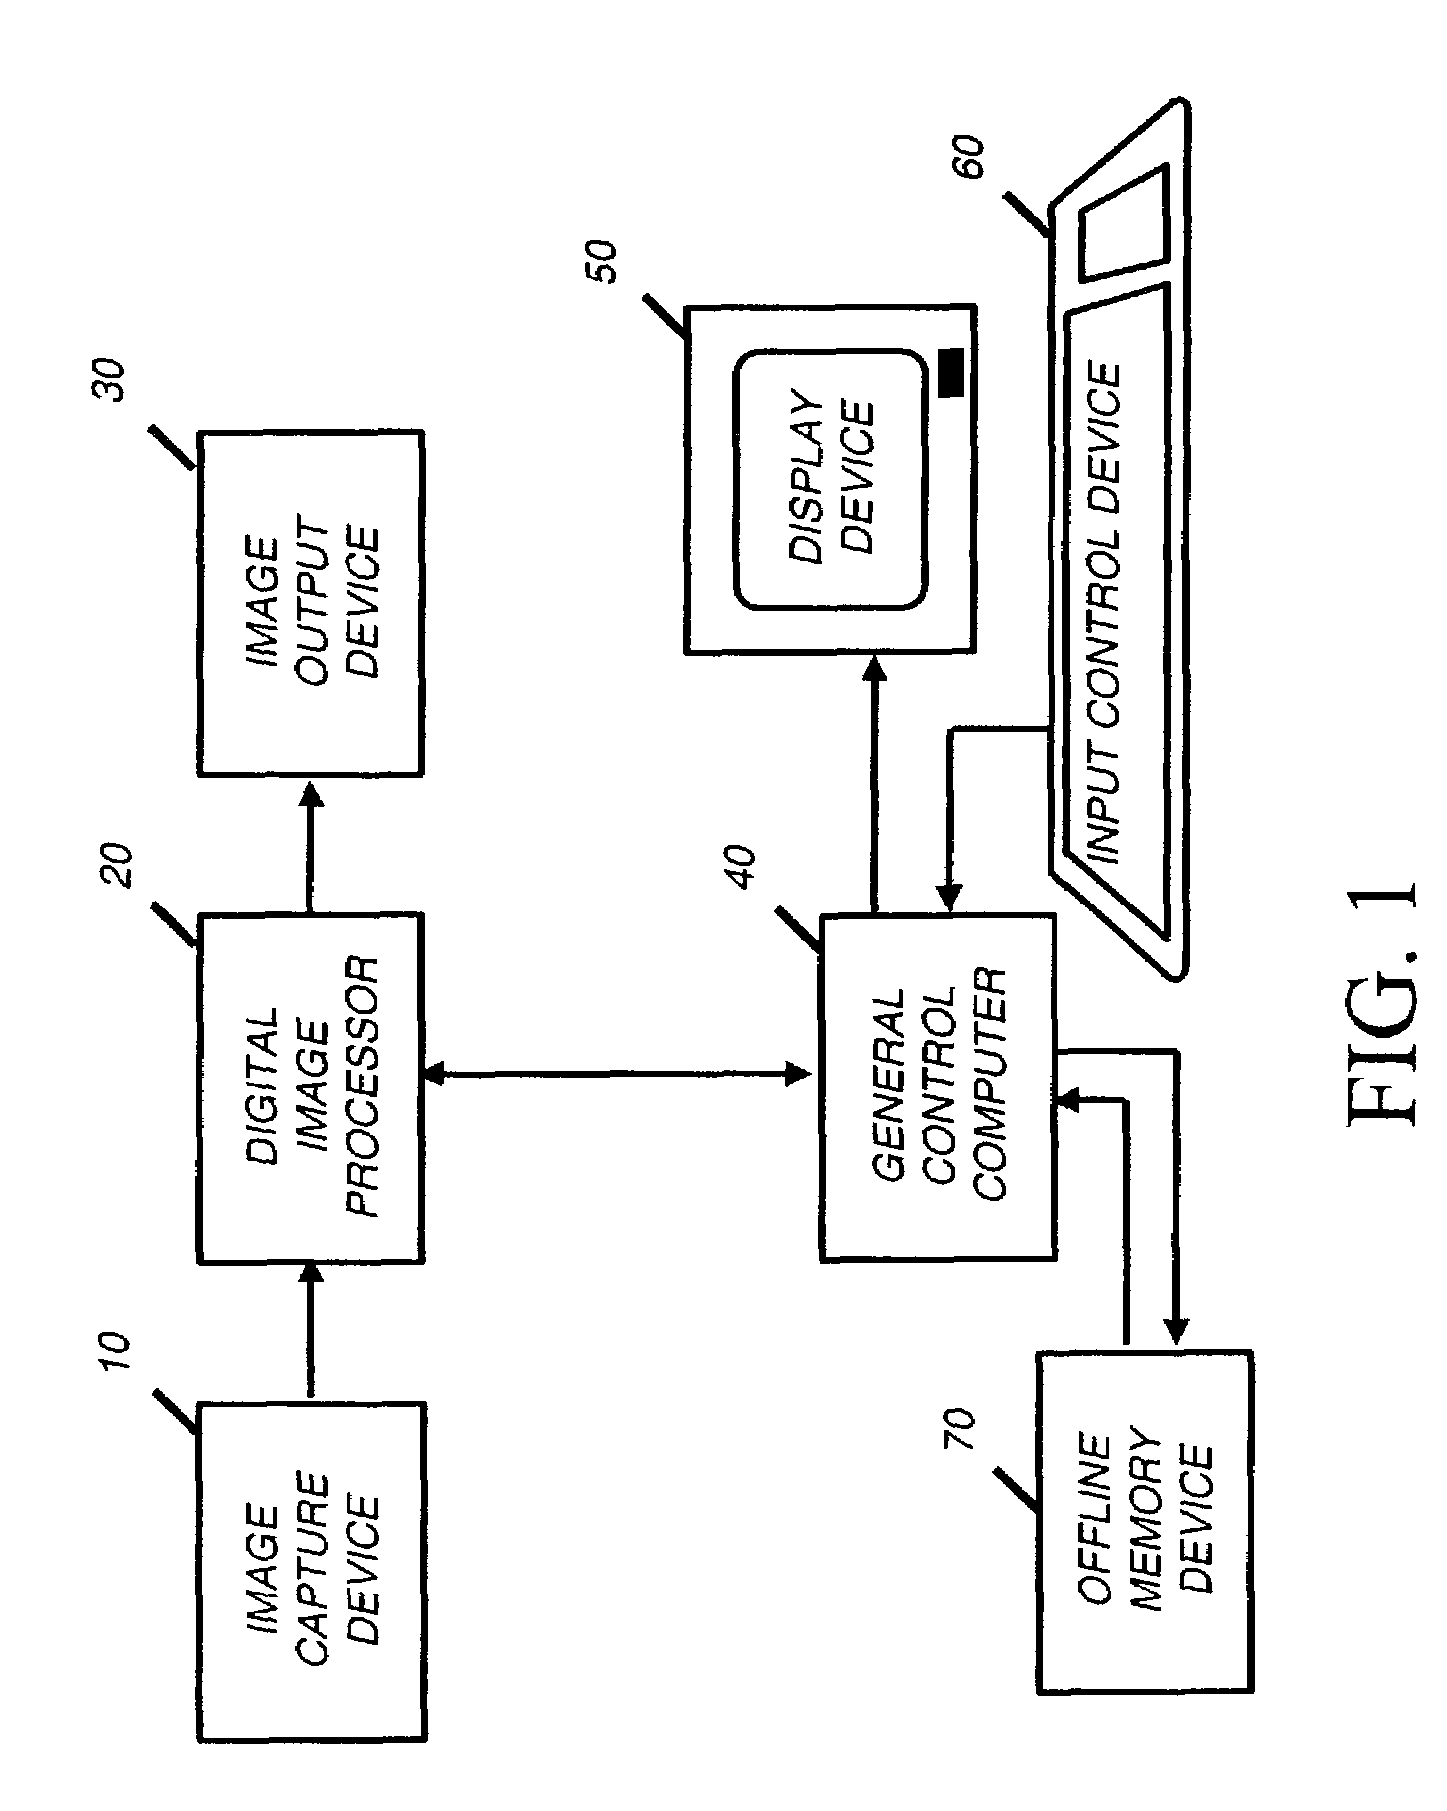 Method of spatially filtering a digital image using chrominance information